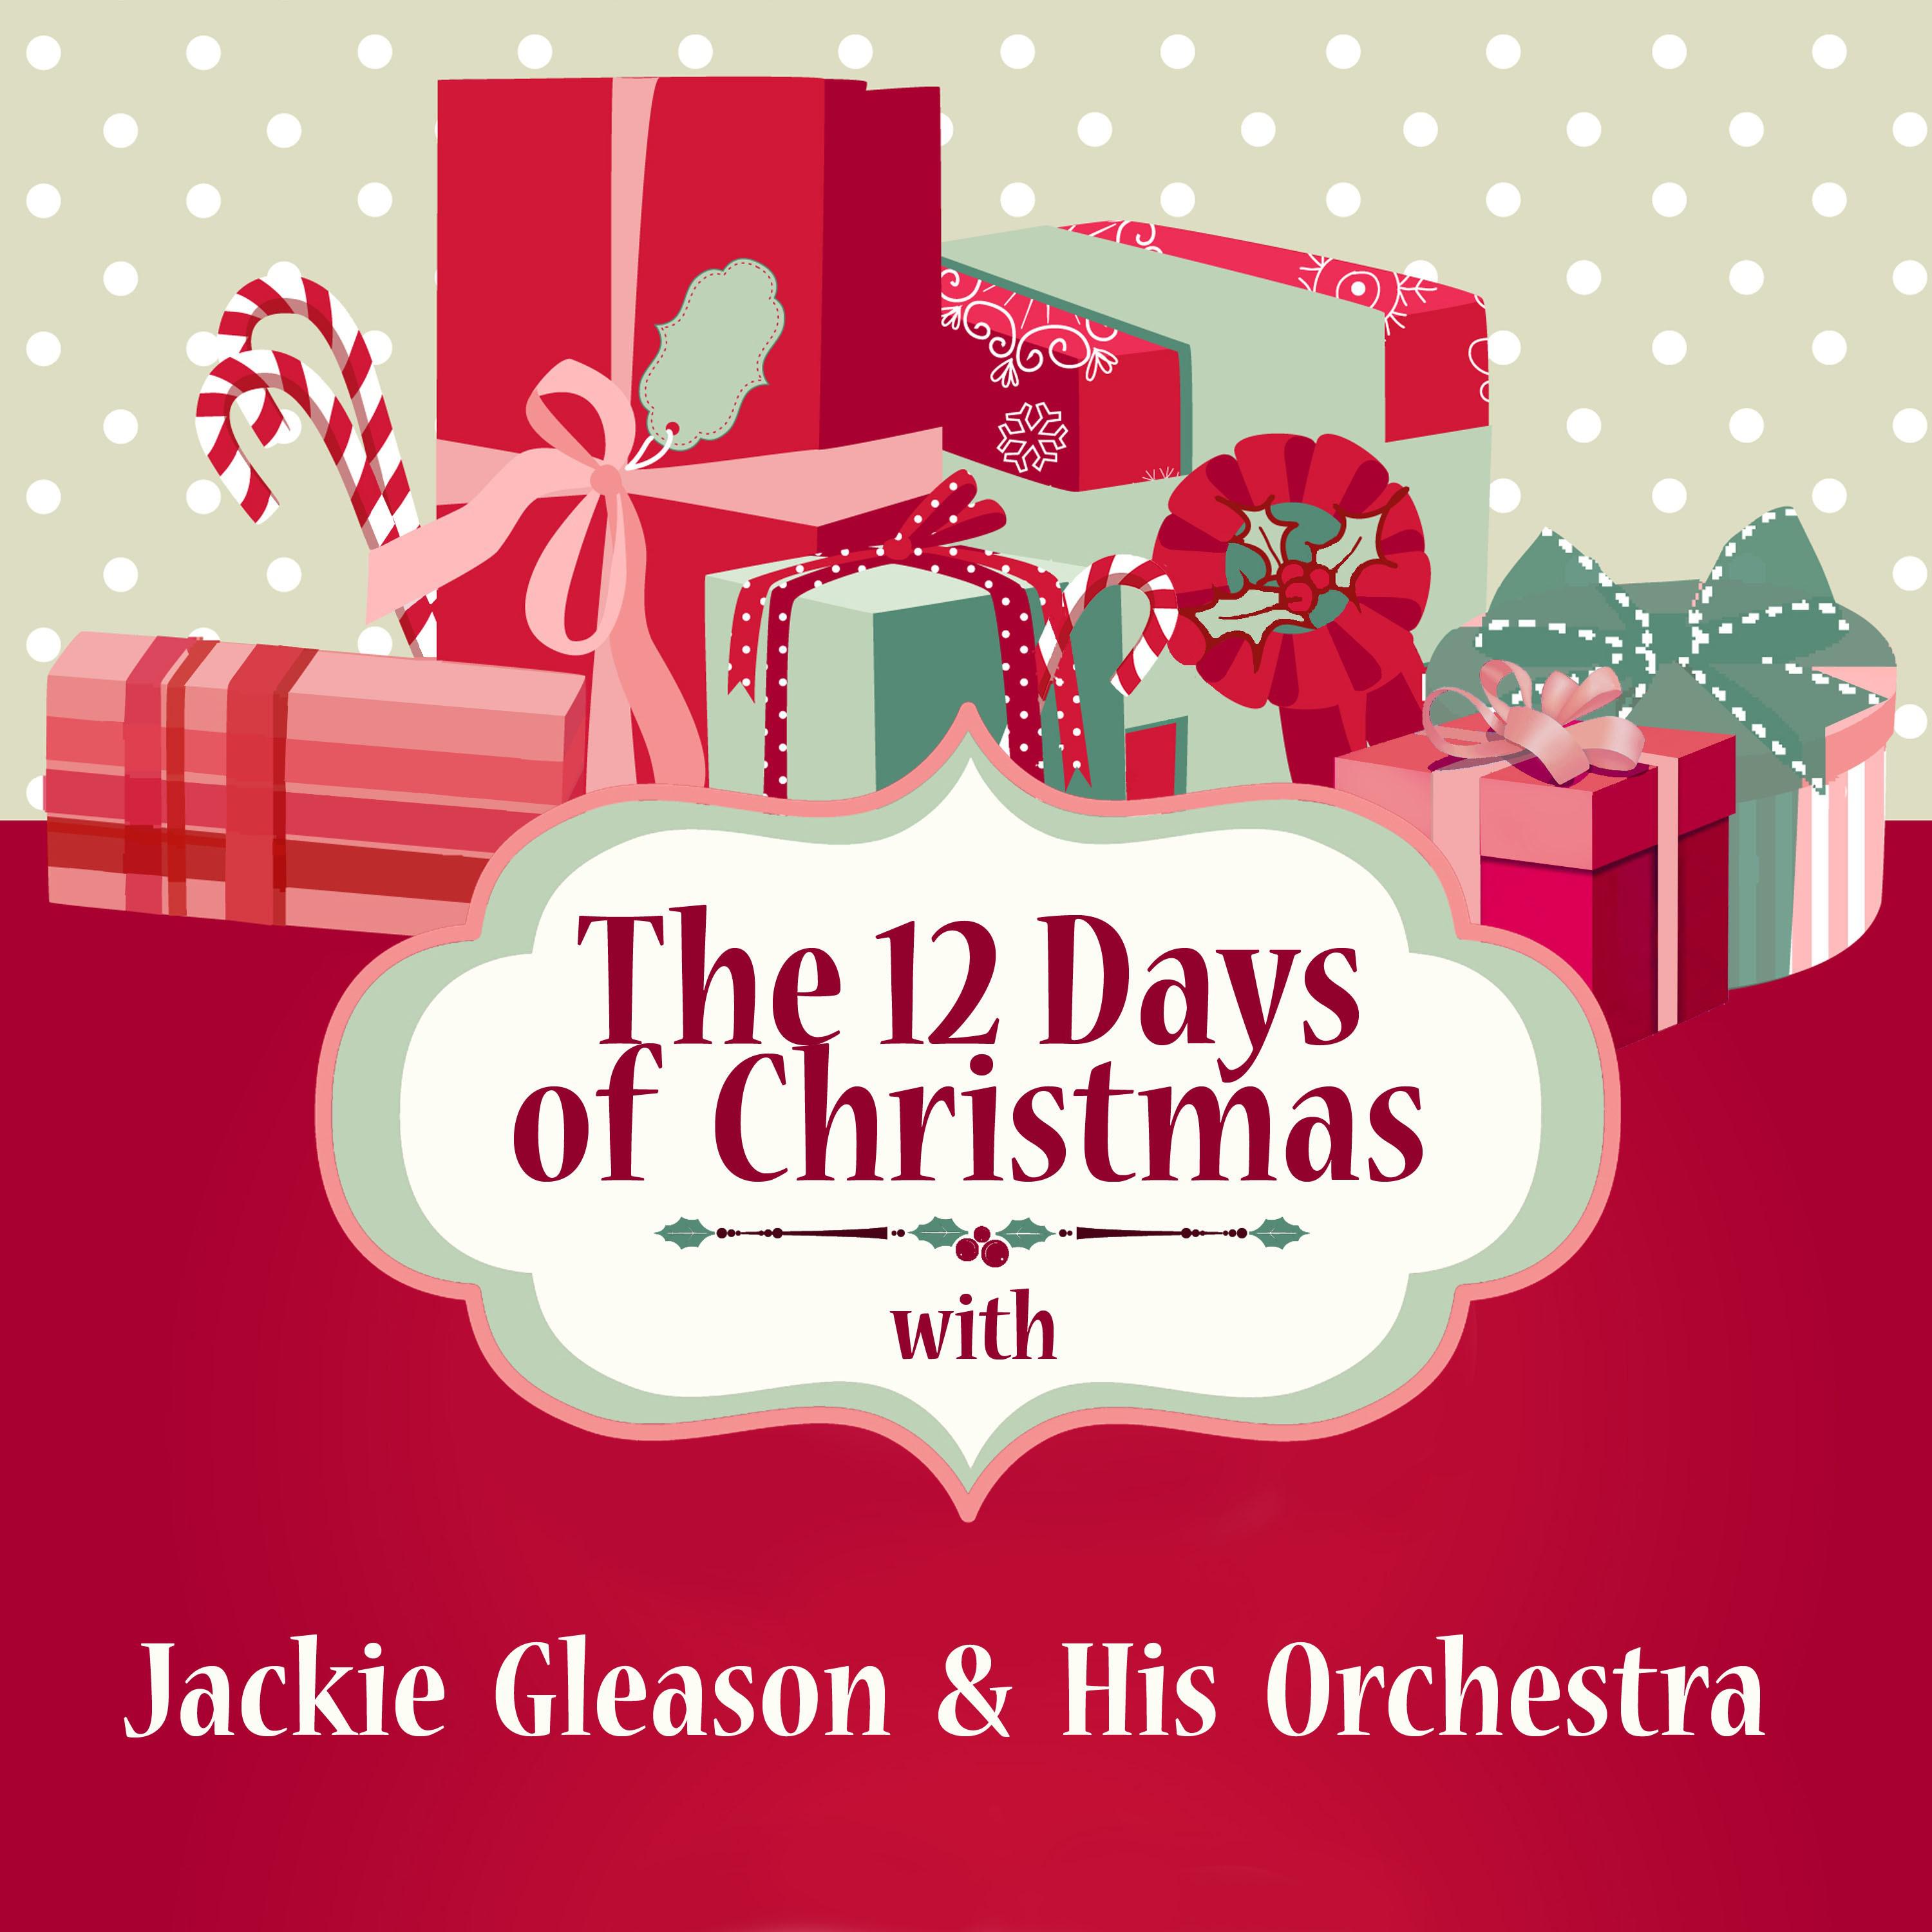 The 12 Days of Christmas with Jackie Gleason & His Orchestra